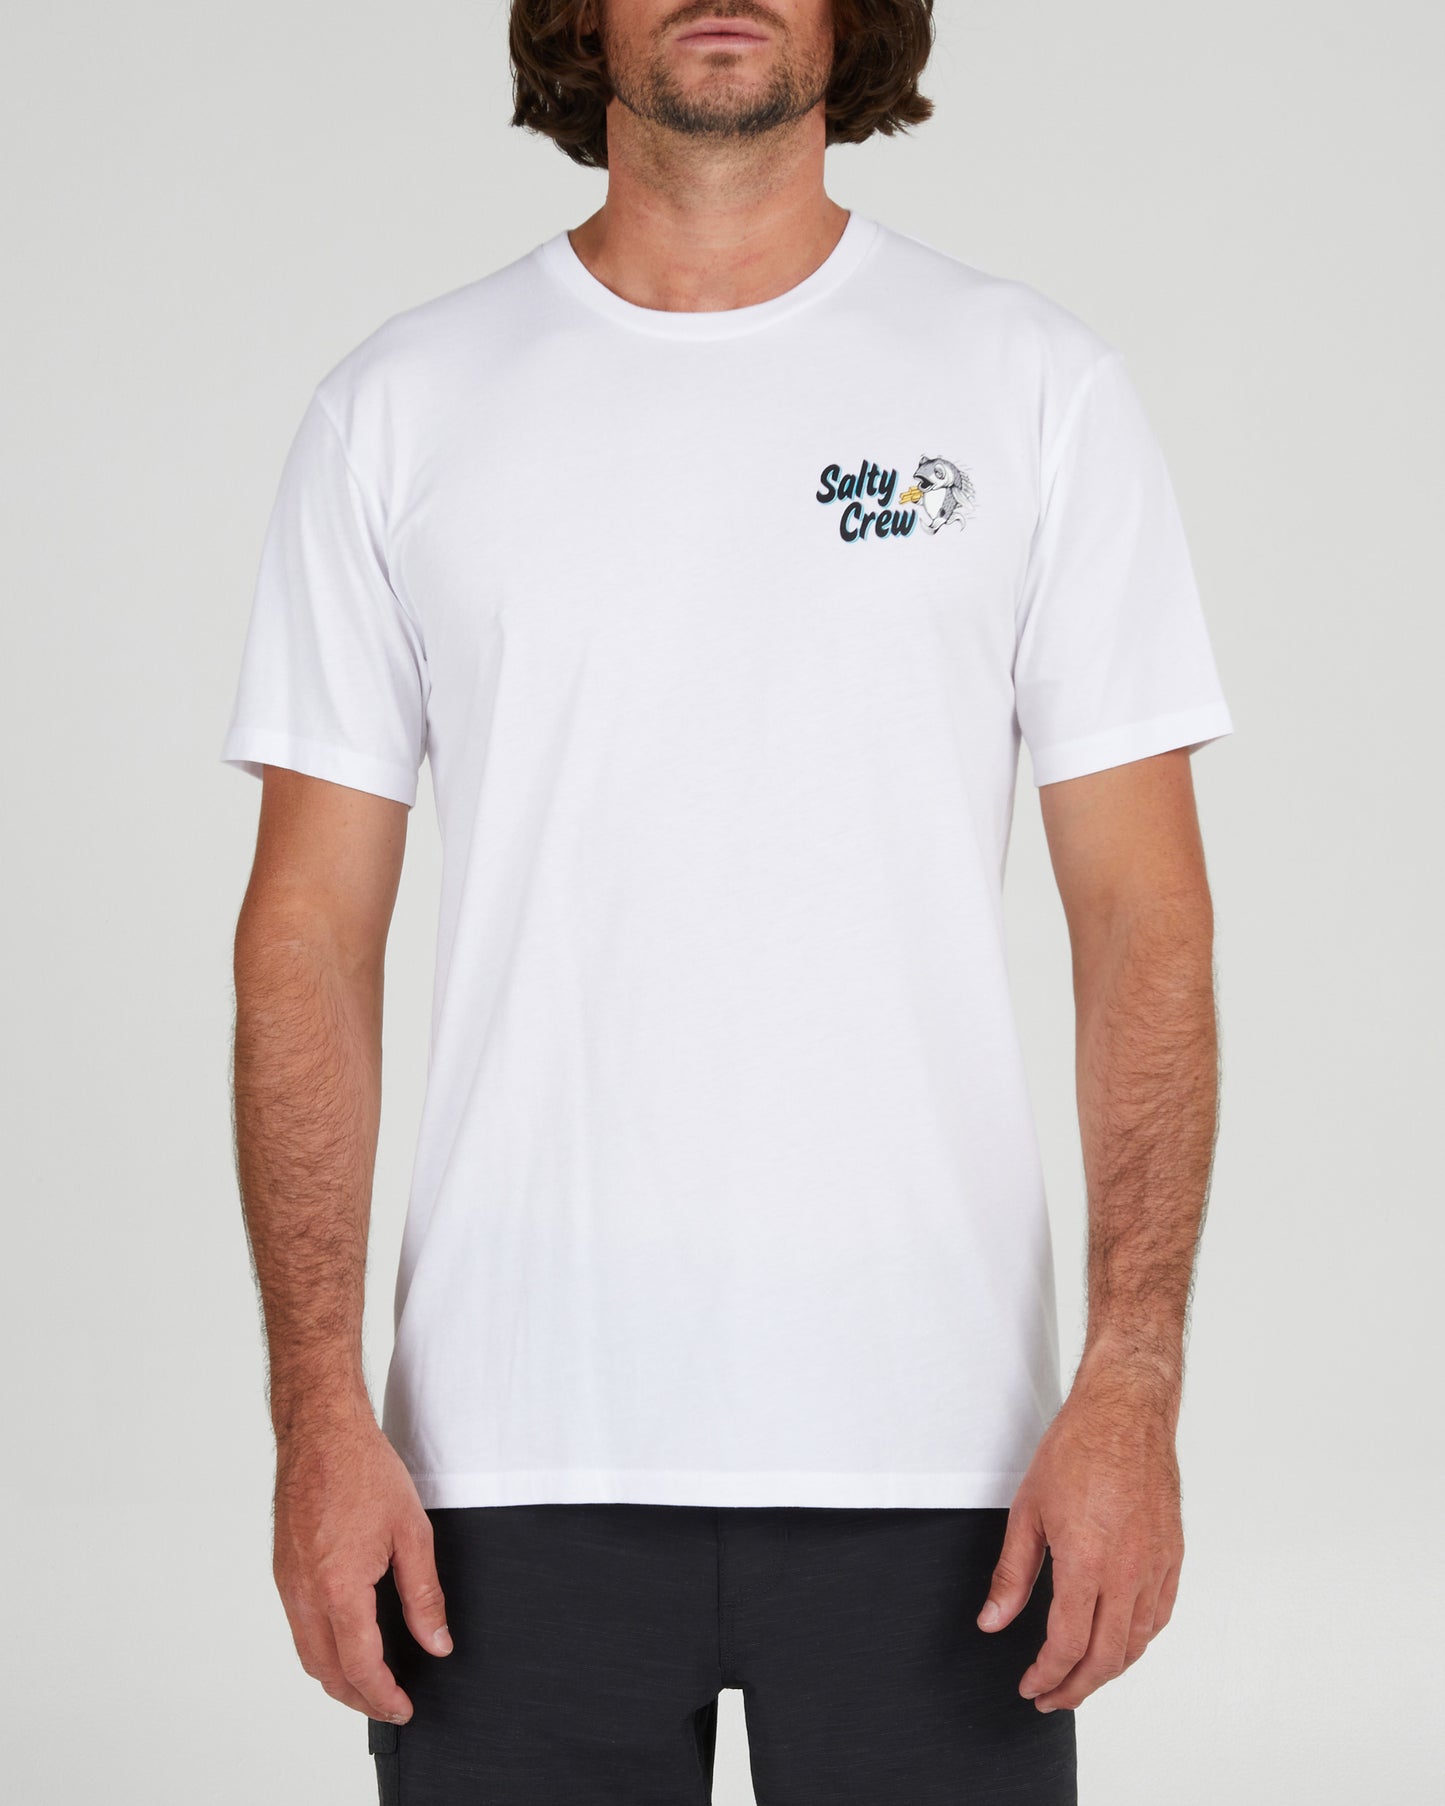 On body front of the Fish and Chips White S/S Premium Tee